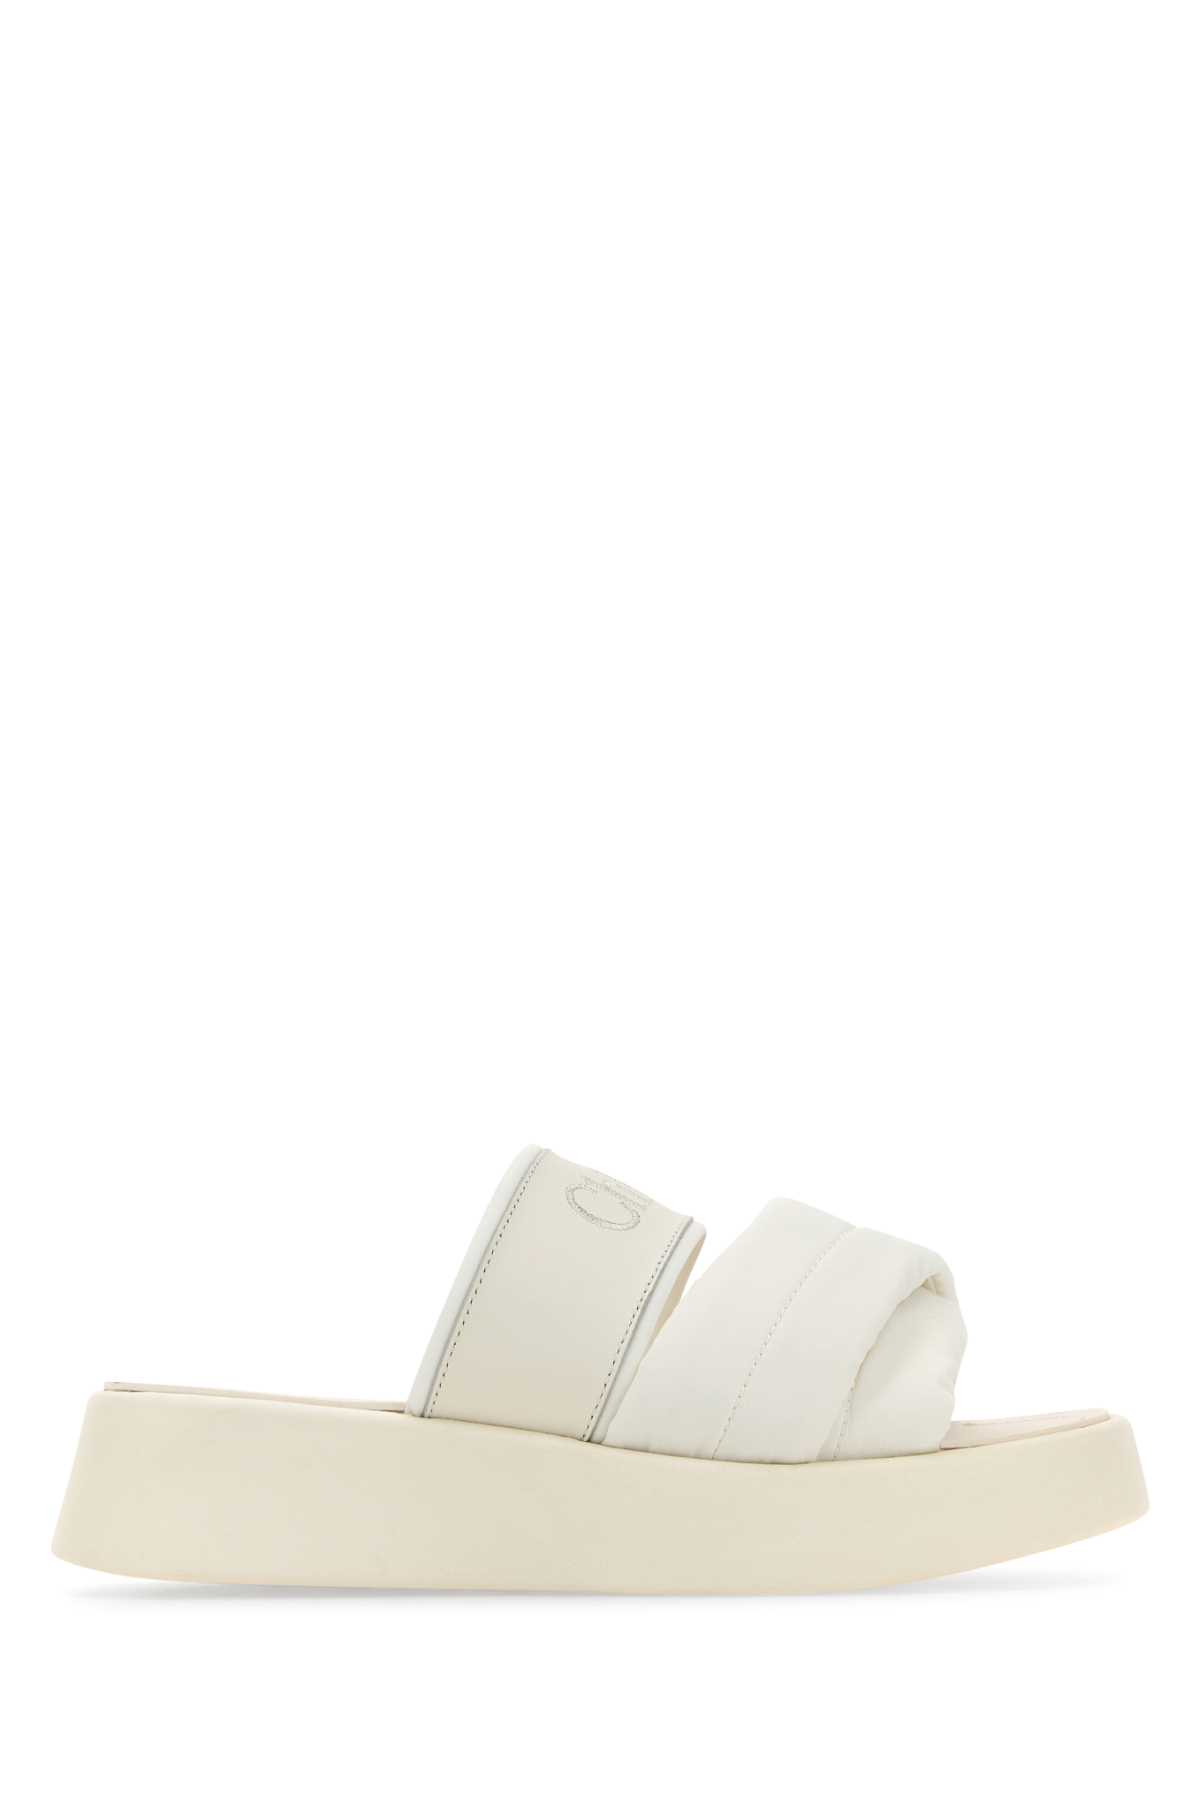 Chloé White Fabric And Leather Mila Slippers